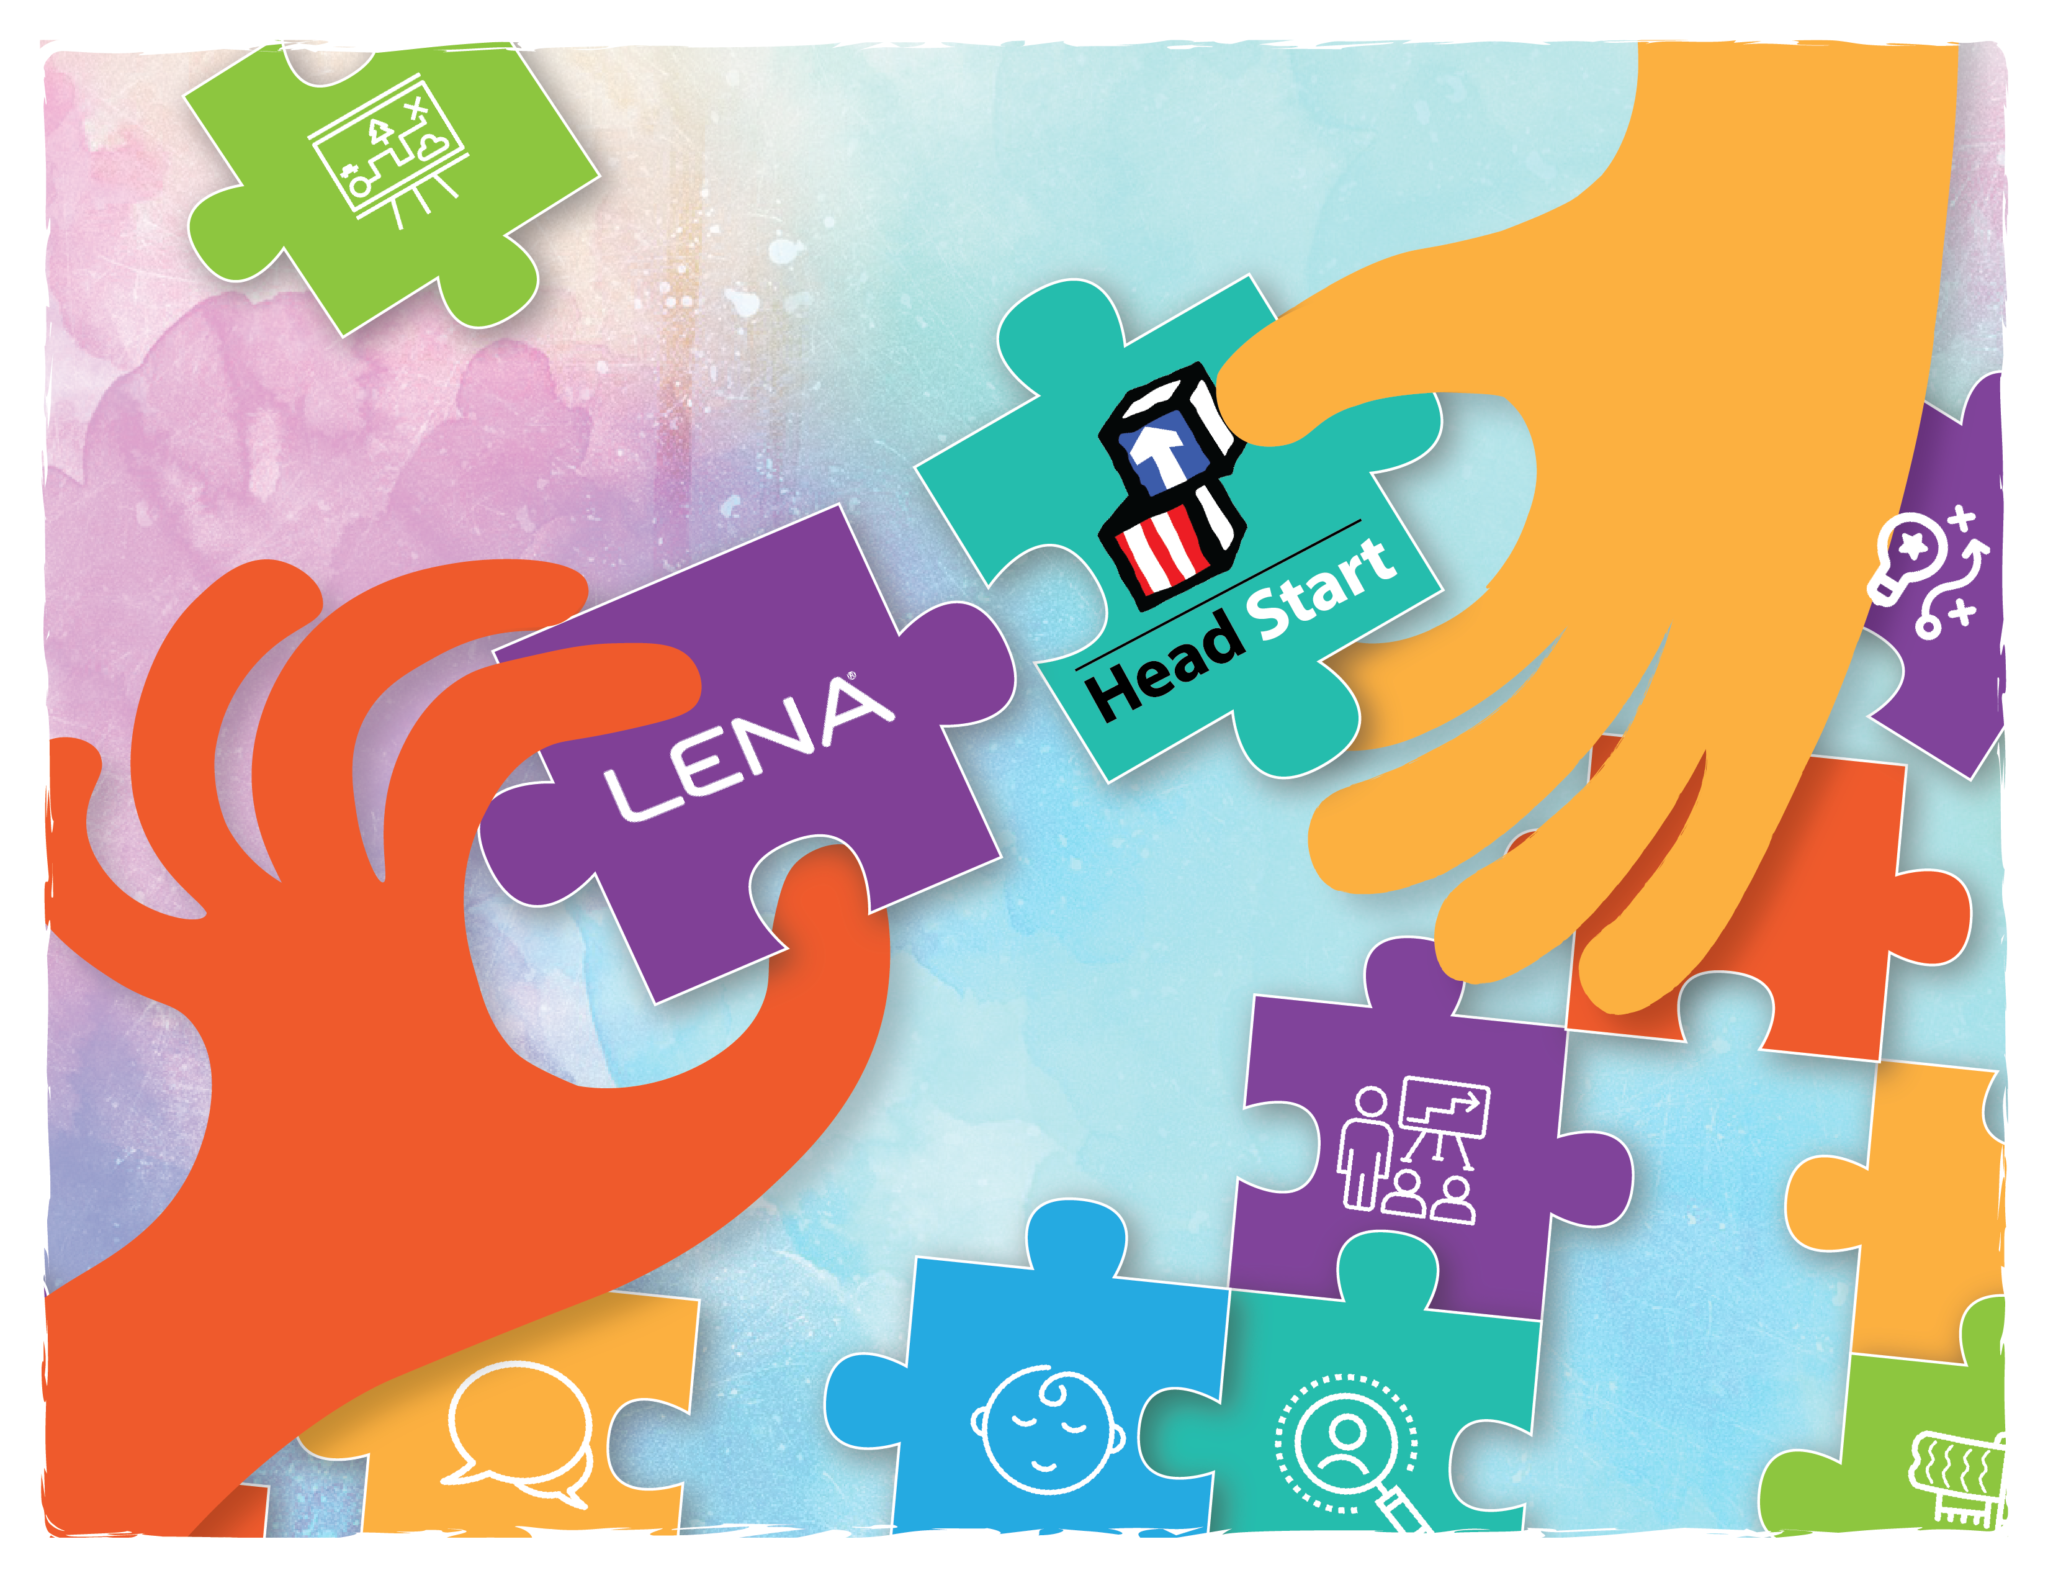 LENA and Head Start puzzle pieces connecting